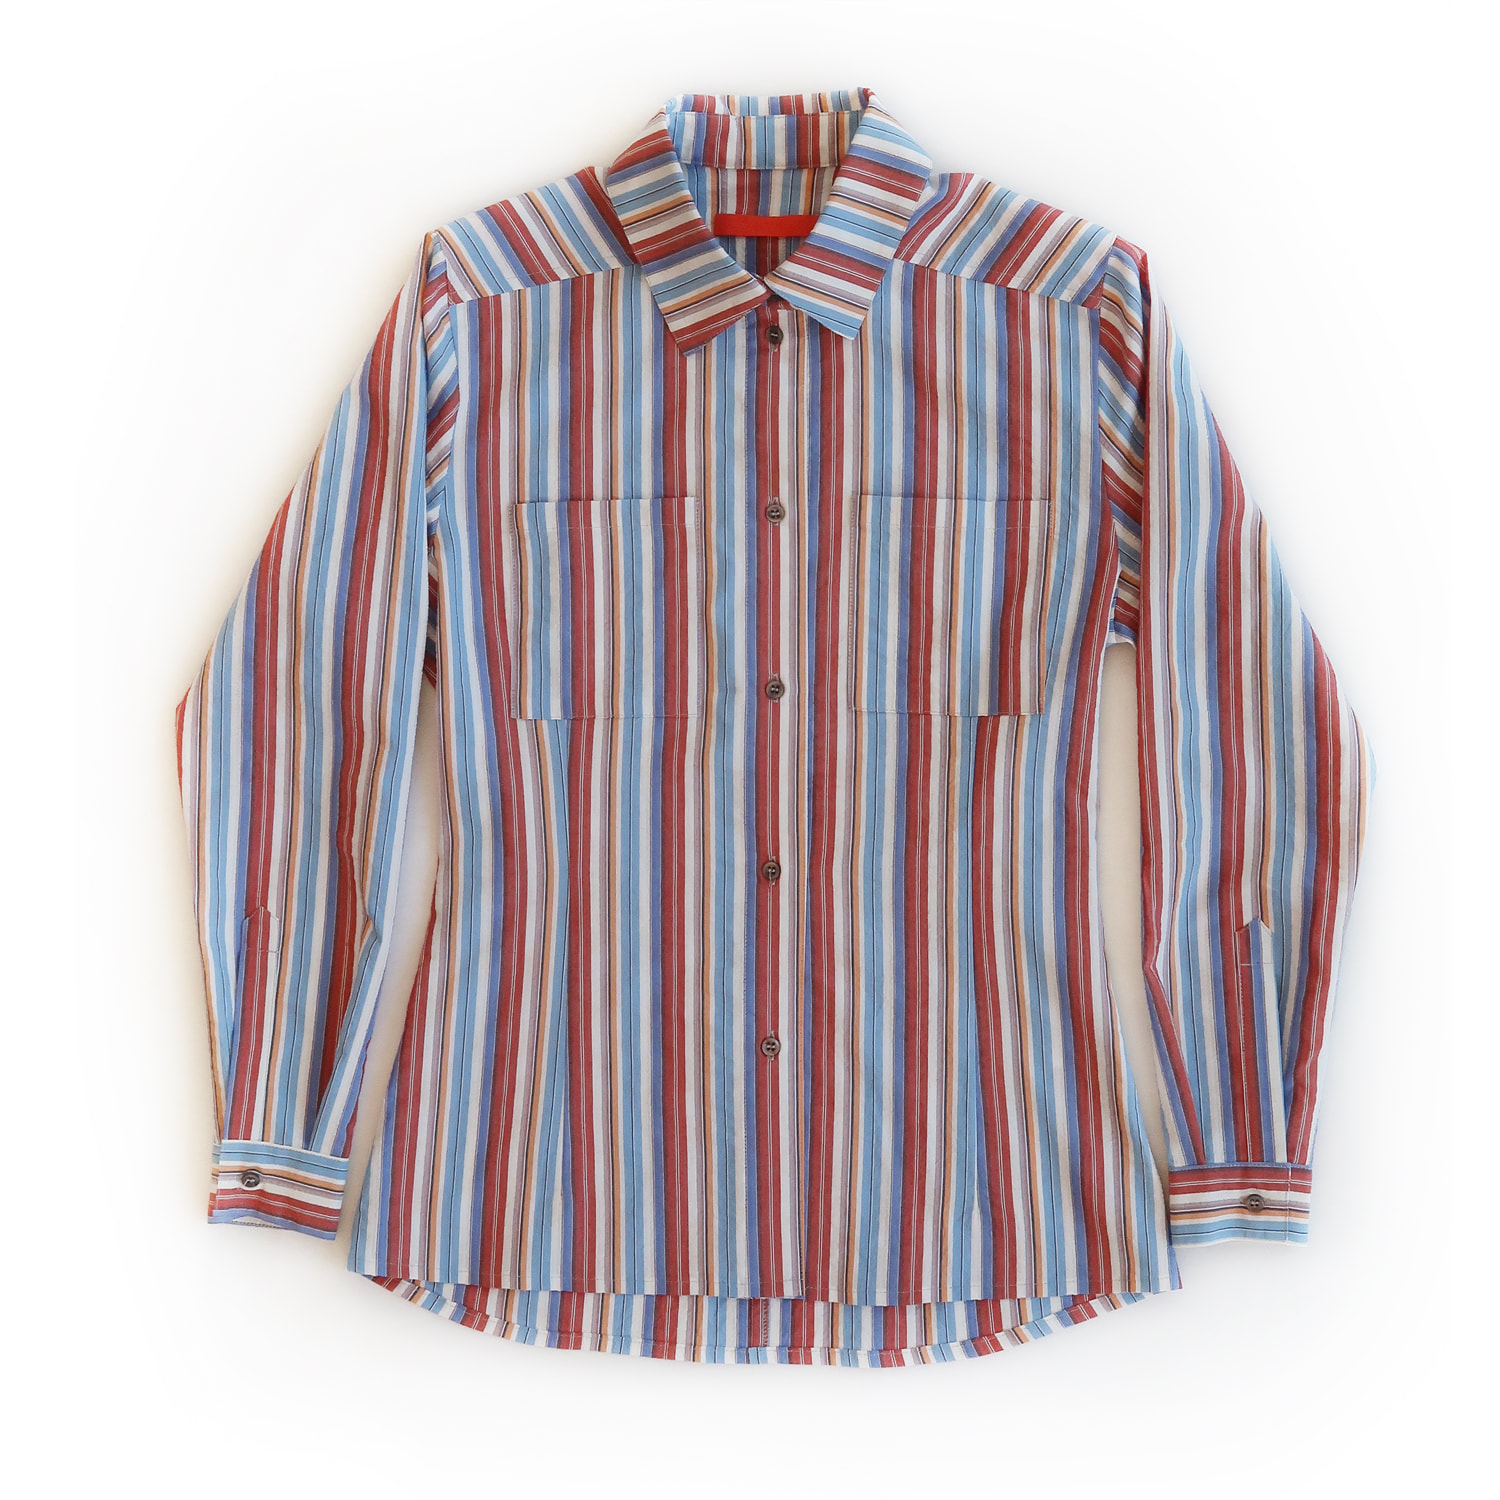 THE TIGHT COTTON BUSINESS SHIRT